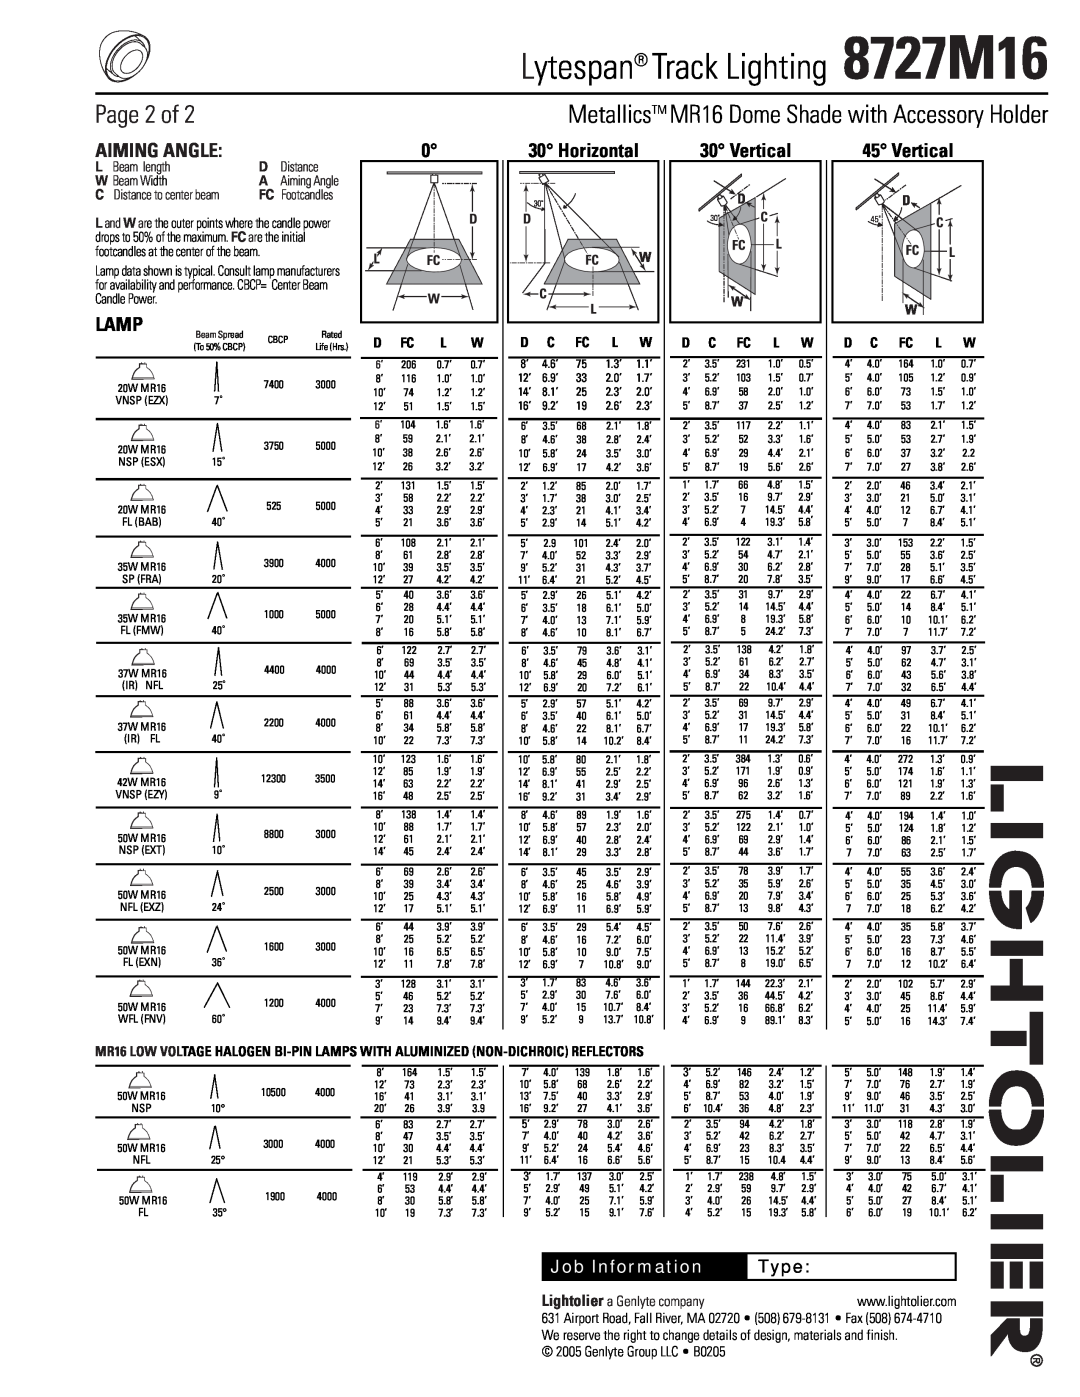 Lightolier 8727M16 manual Page 2 of, Aiming Angle, Lamp, Horizontal, Vertical, L Beam length, Distance, W Beam Width, Type 